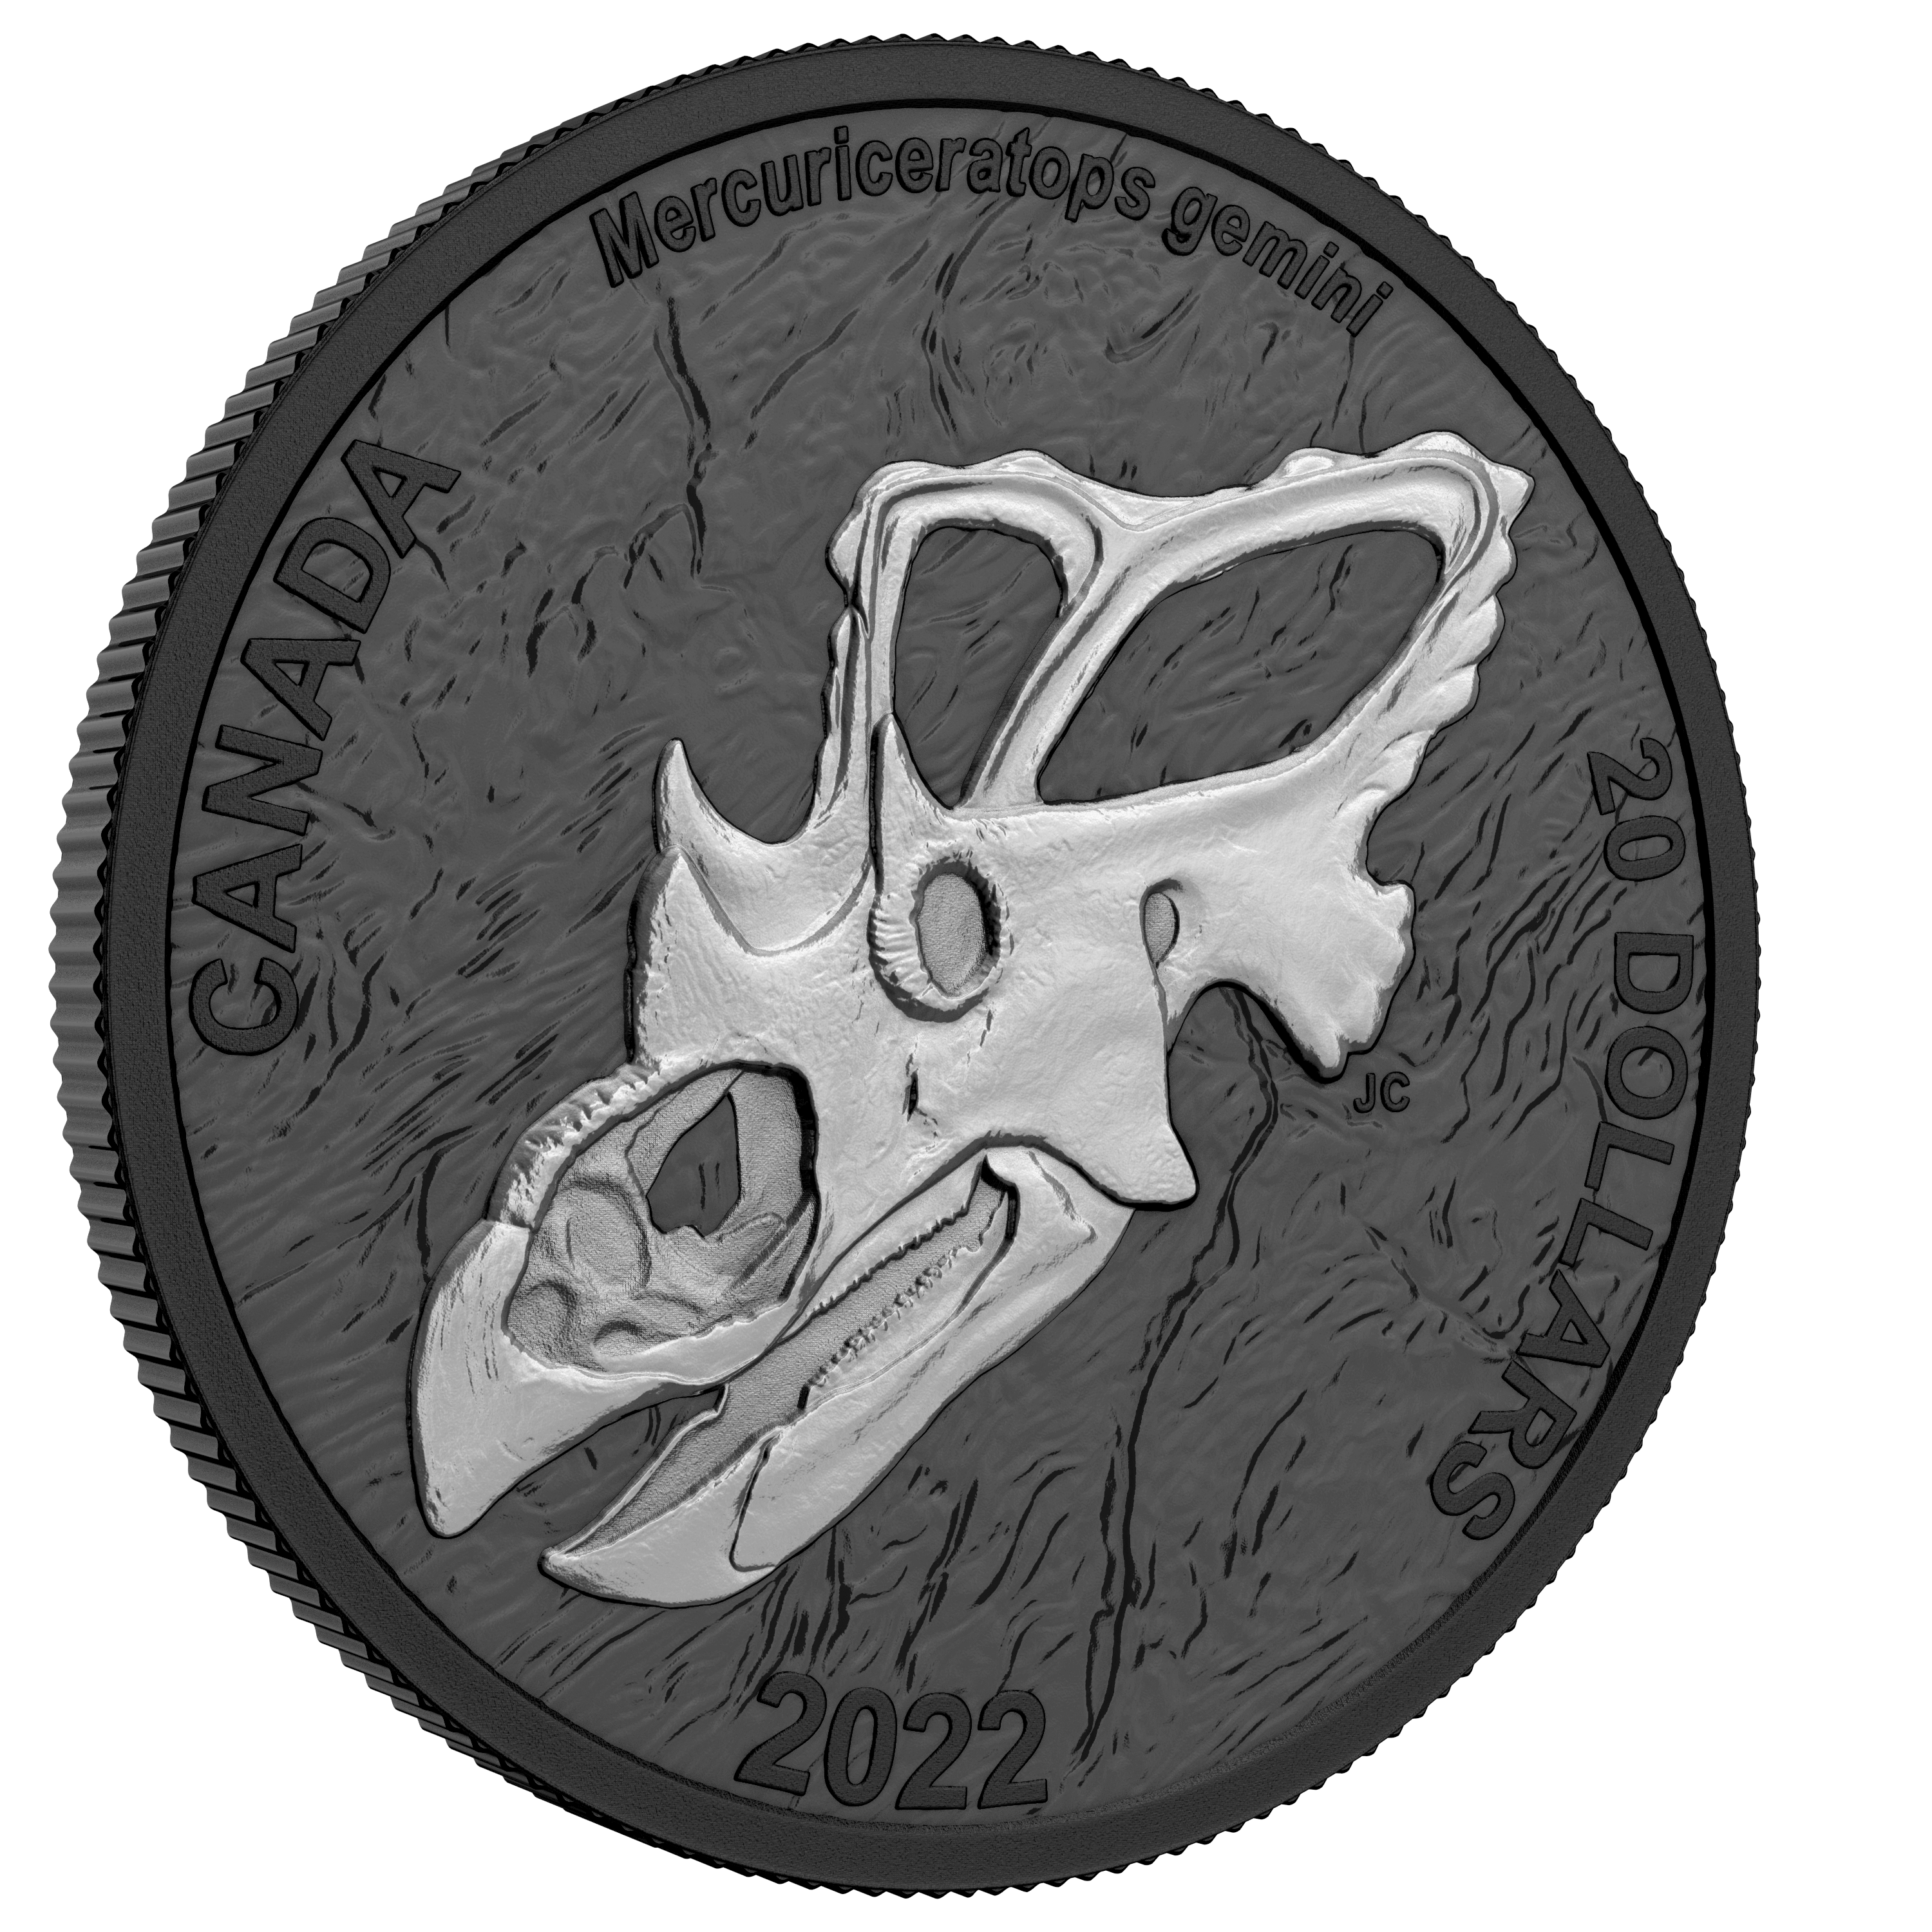 MERCURY'S HORNED FACE Discovering Dinosaurs 1 Oz Silver Coin $20 Canada 2022